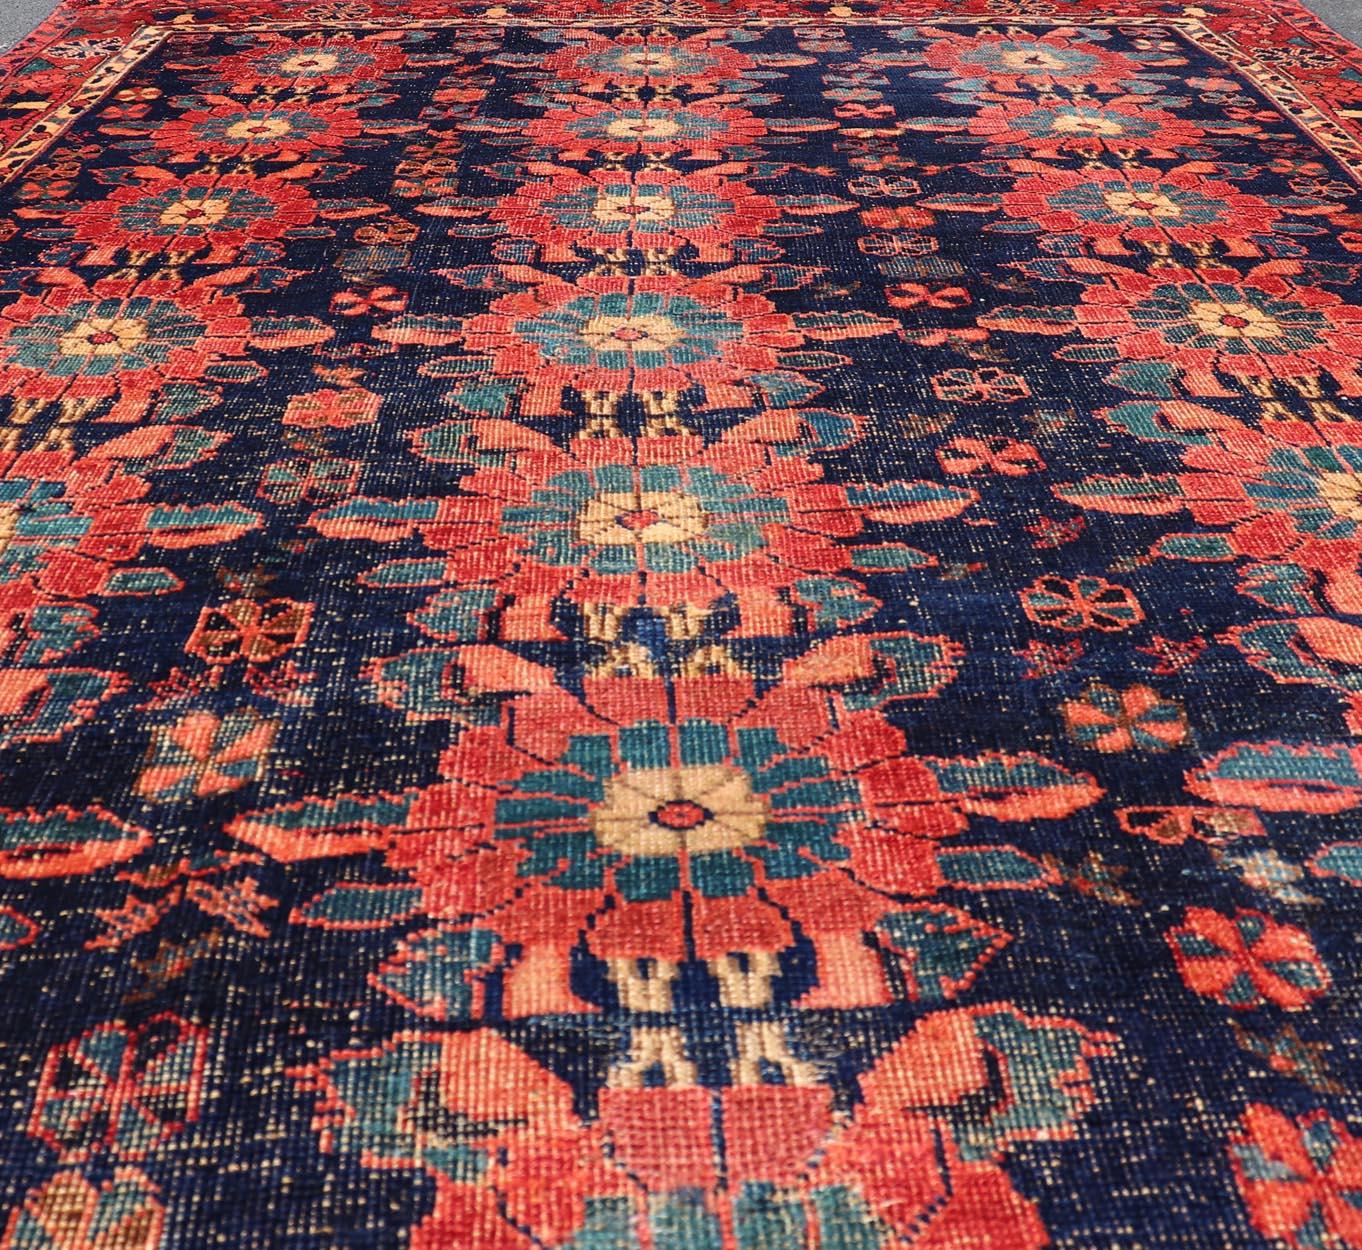 Antique Persian Bidjar Rug with All-Over Floral Motifs in Red and Blue. Keivan Woven Arts / EMBC-9699-13819, country of origin / type: Iran / Bidjar, circa 1900
Measures: 5'0 x 7'9 
This antique Persian Bidjar carpet features multi colors and a